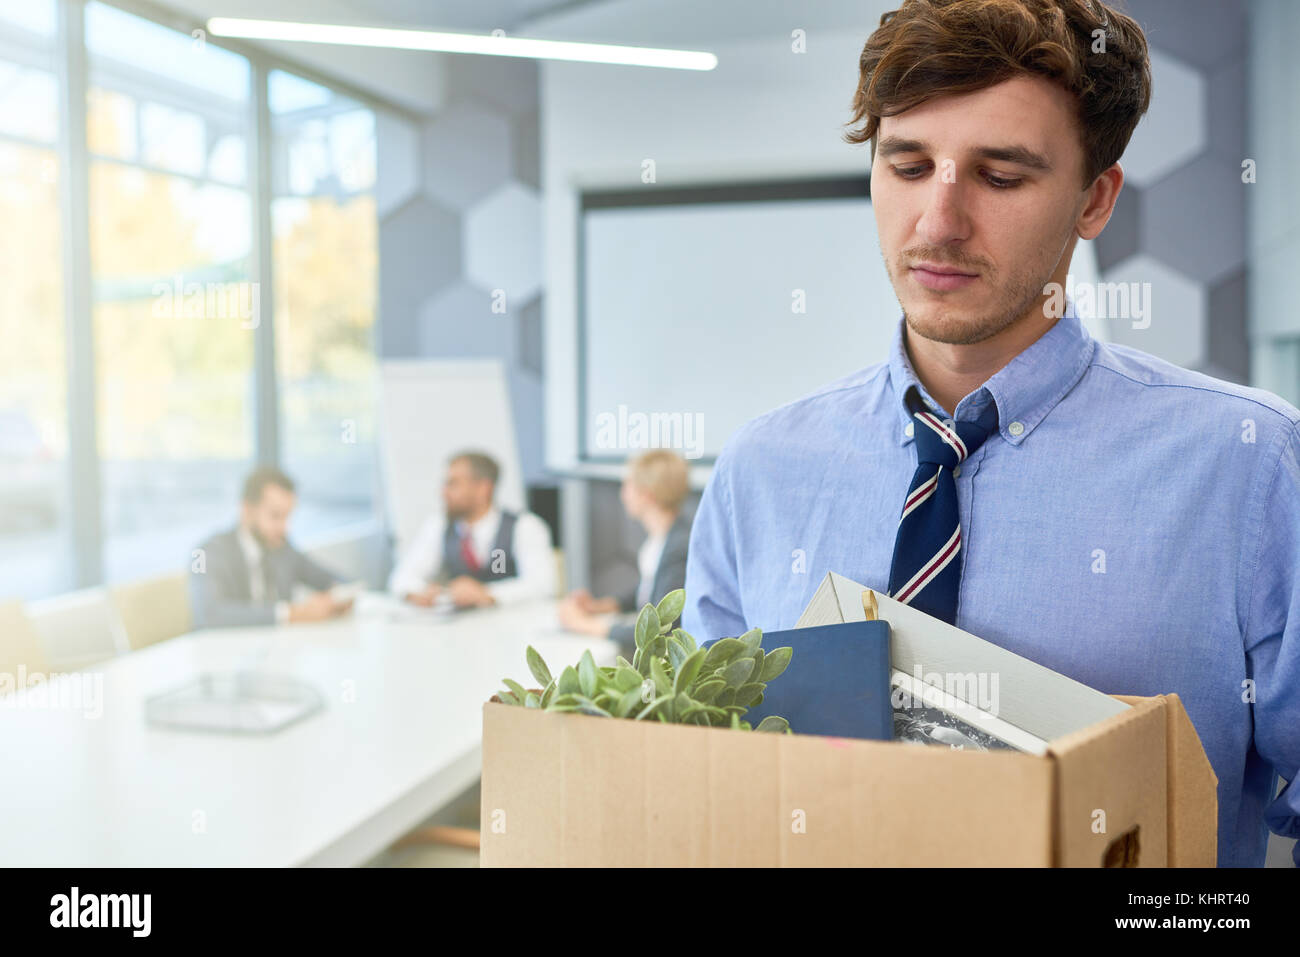 Portrait of sad young man holding box of personal belongings  fired from work in business company, copy space Stock Photo